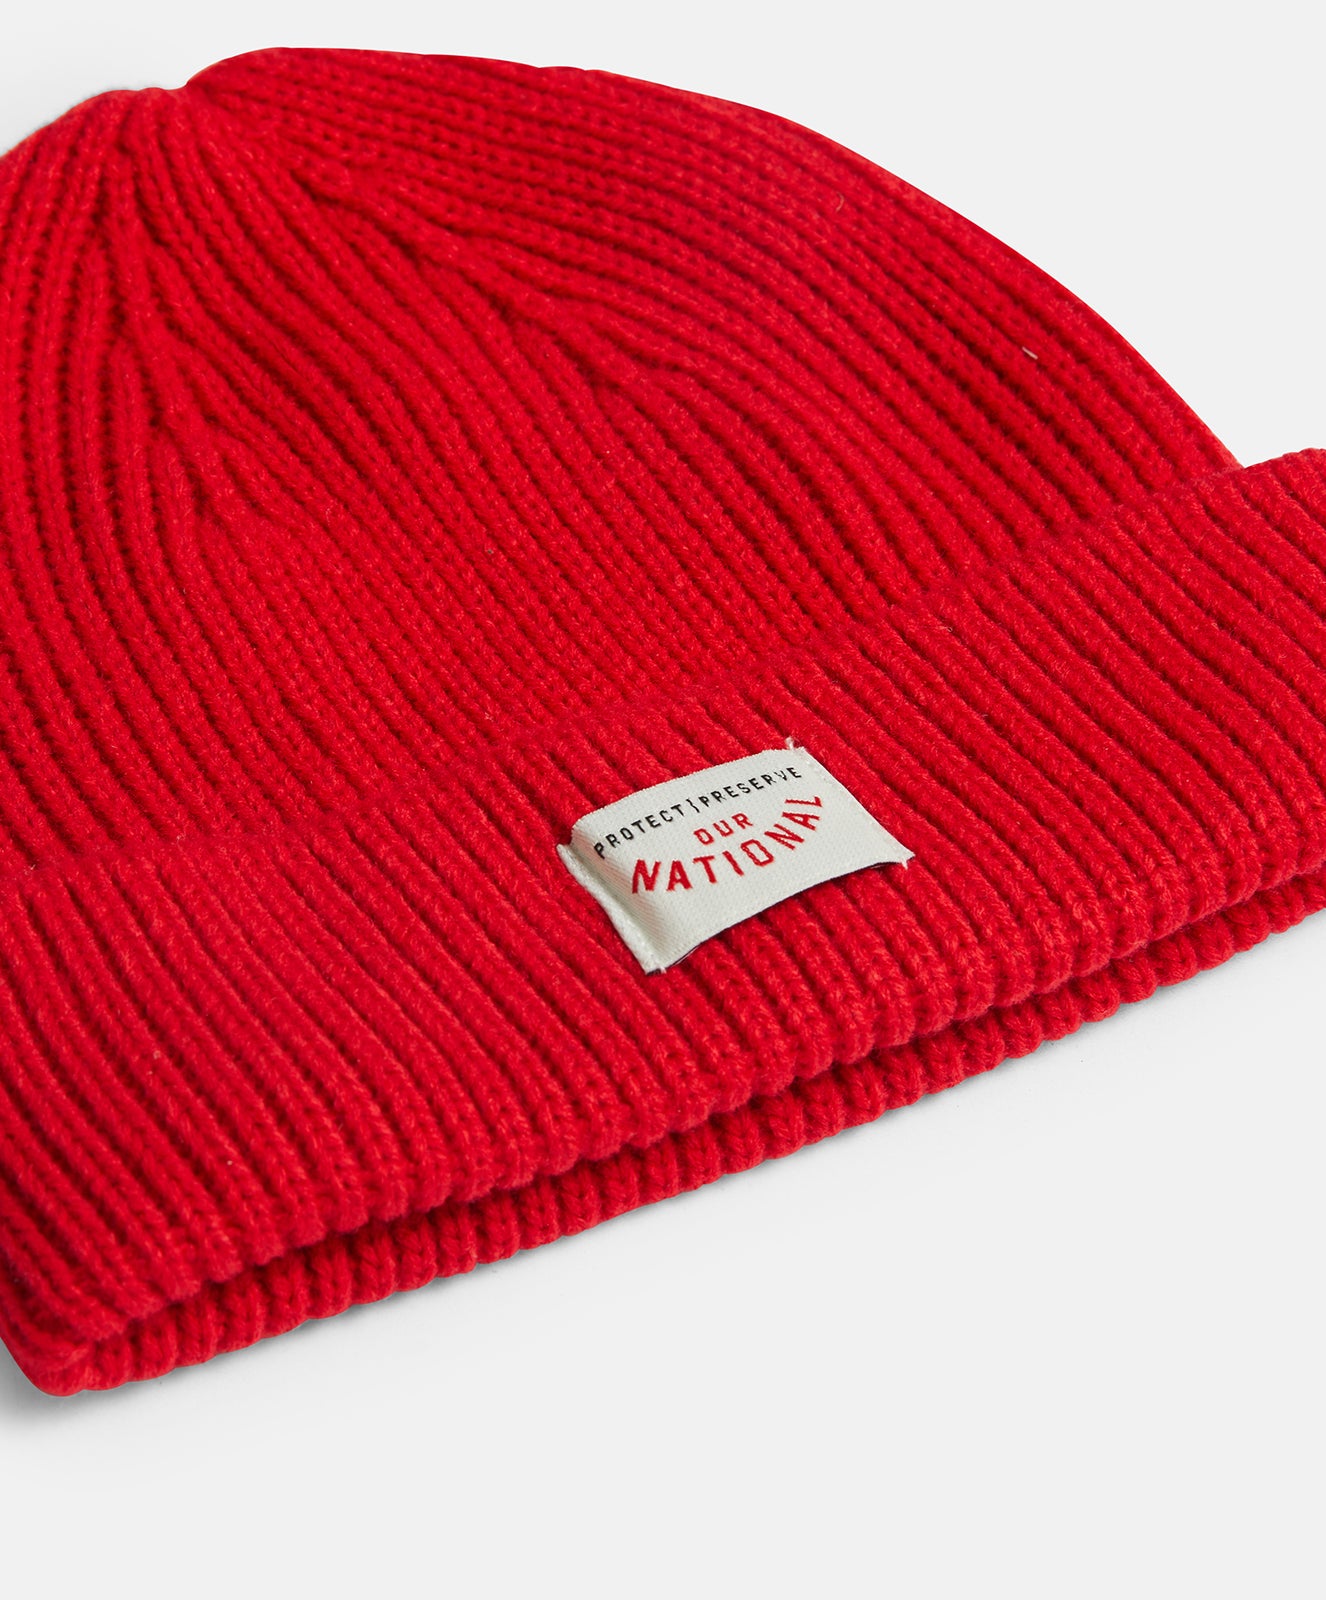 Red Racer Knit Beanie